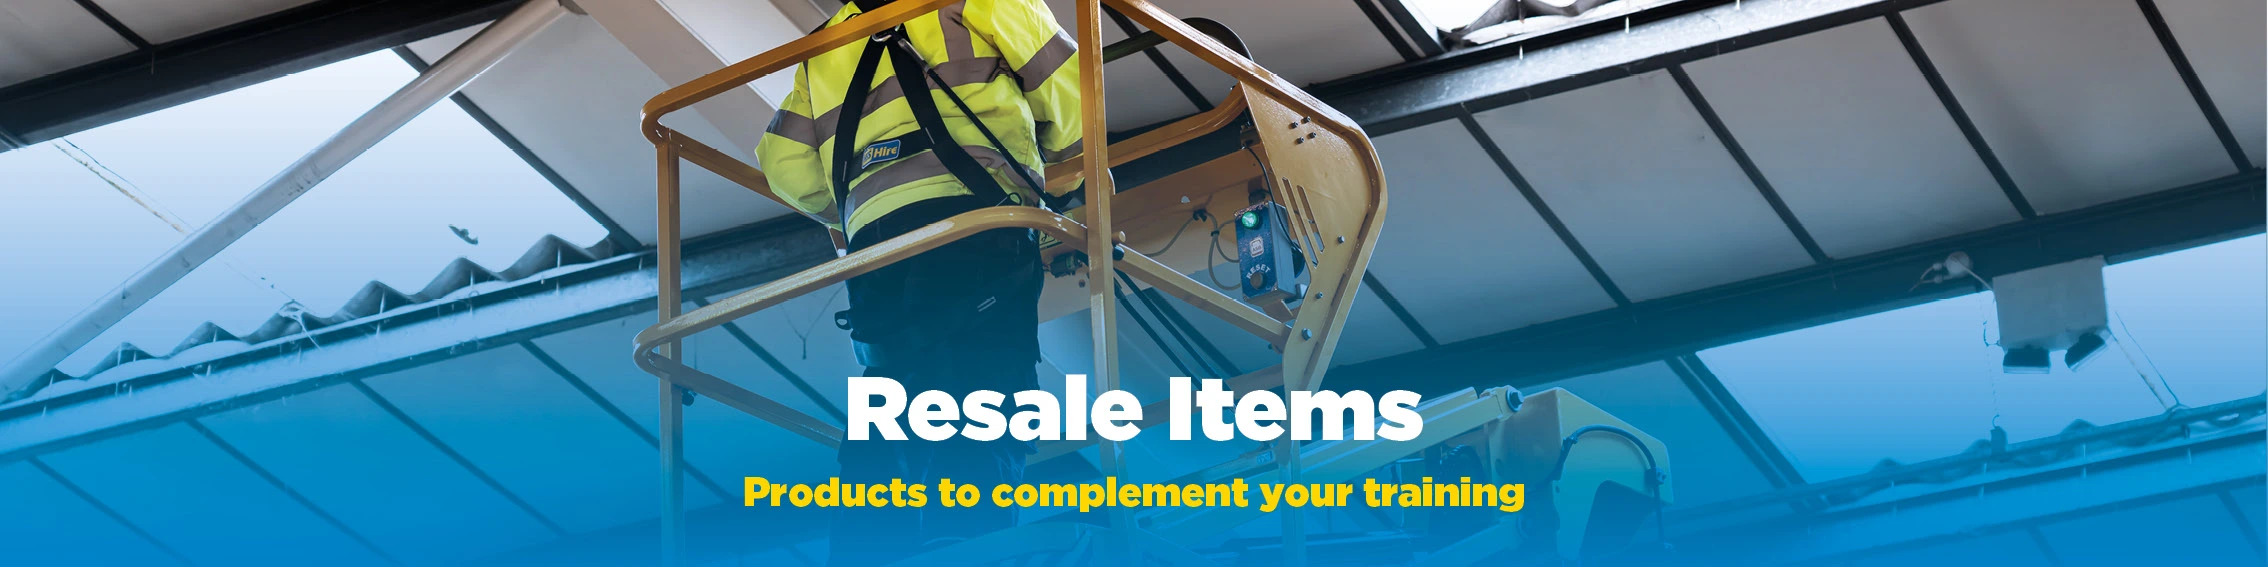 Promotional header image of a worker operating a MEWP with a blue gradient overlay. Text: Resale Items. Products to complement your training